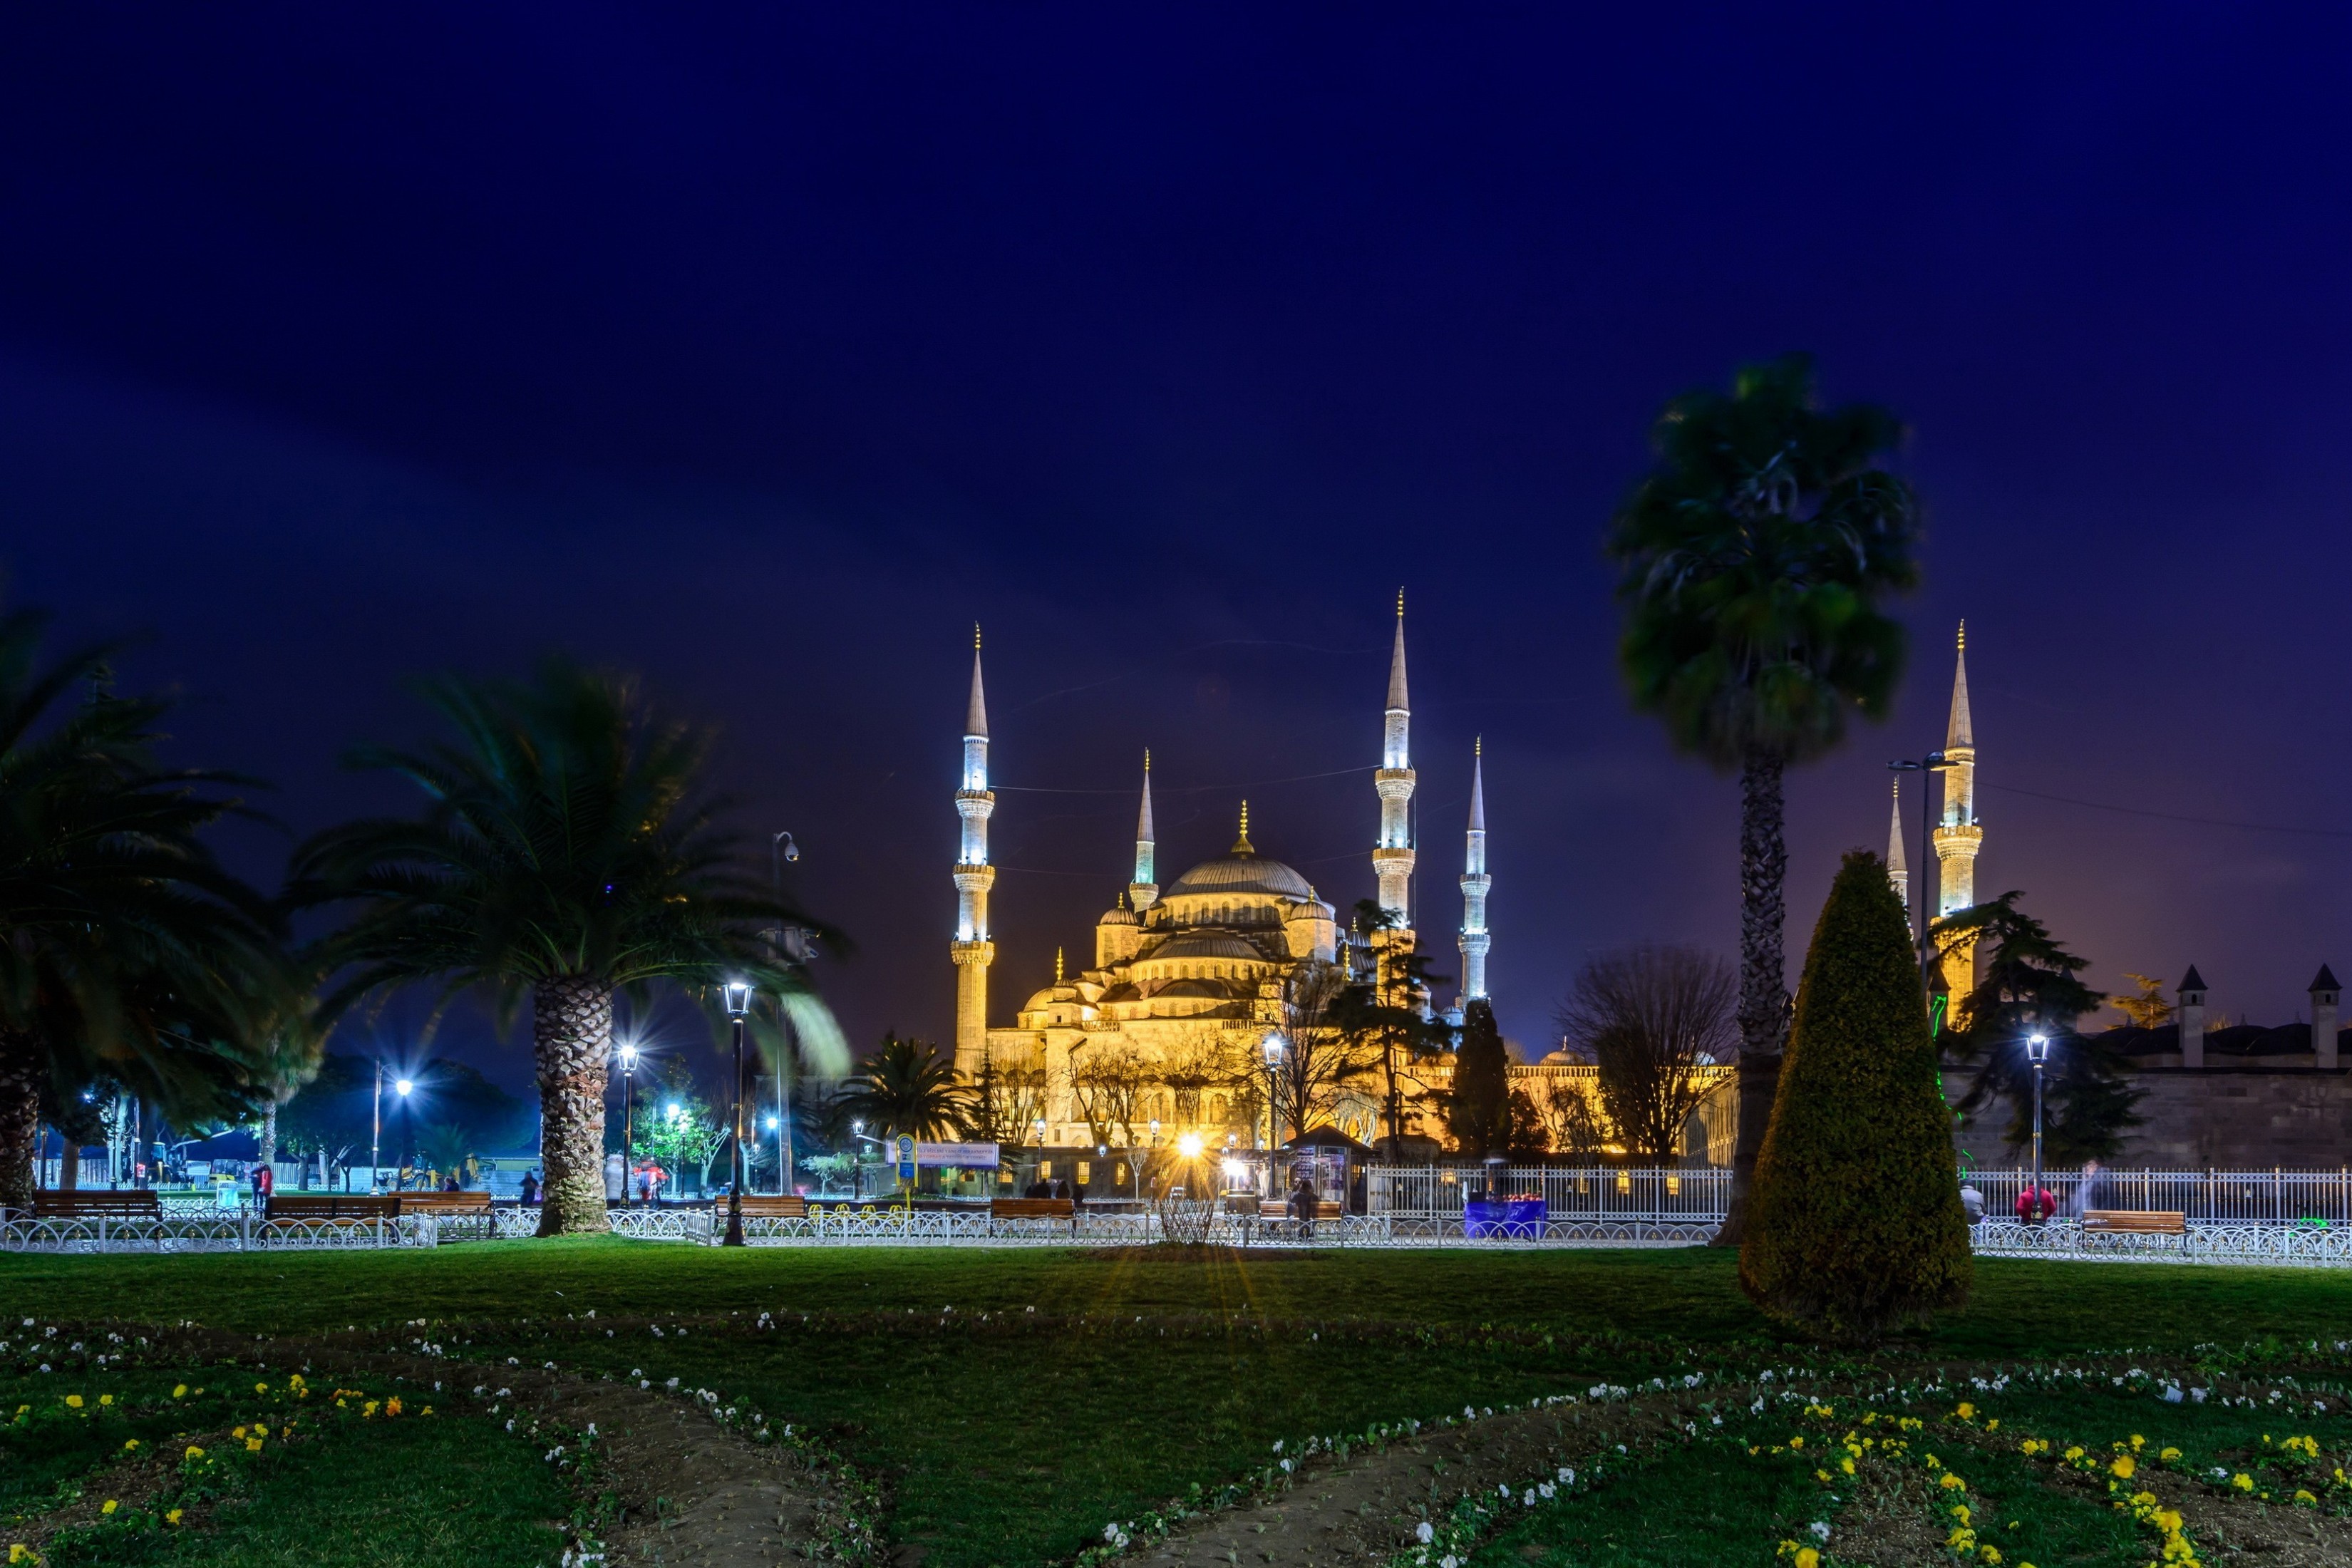 Sultan Ahmed Mosque Istanbul, Turkey at Night